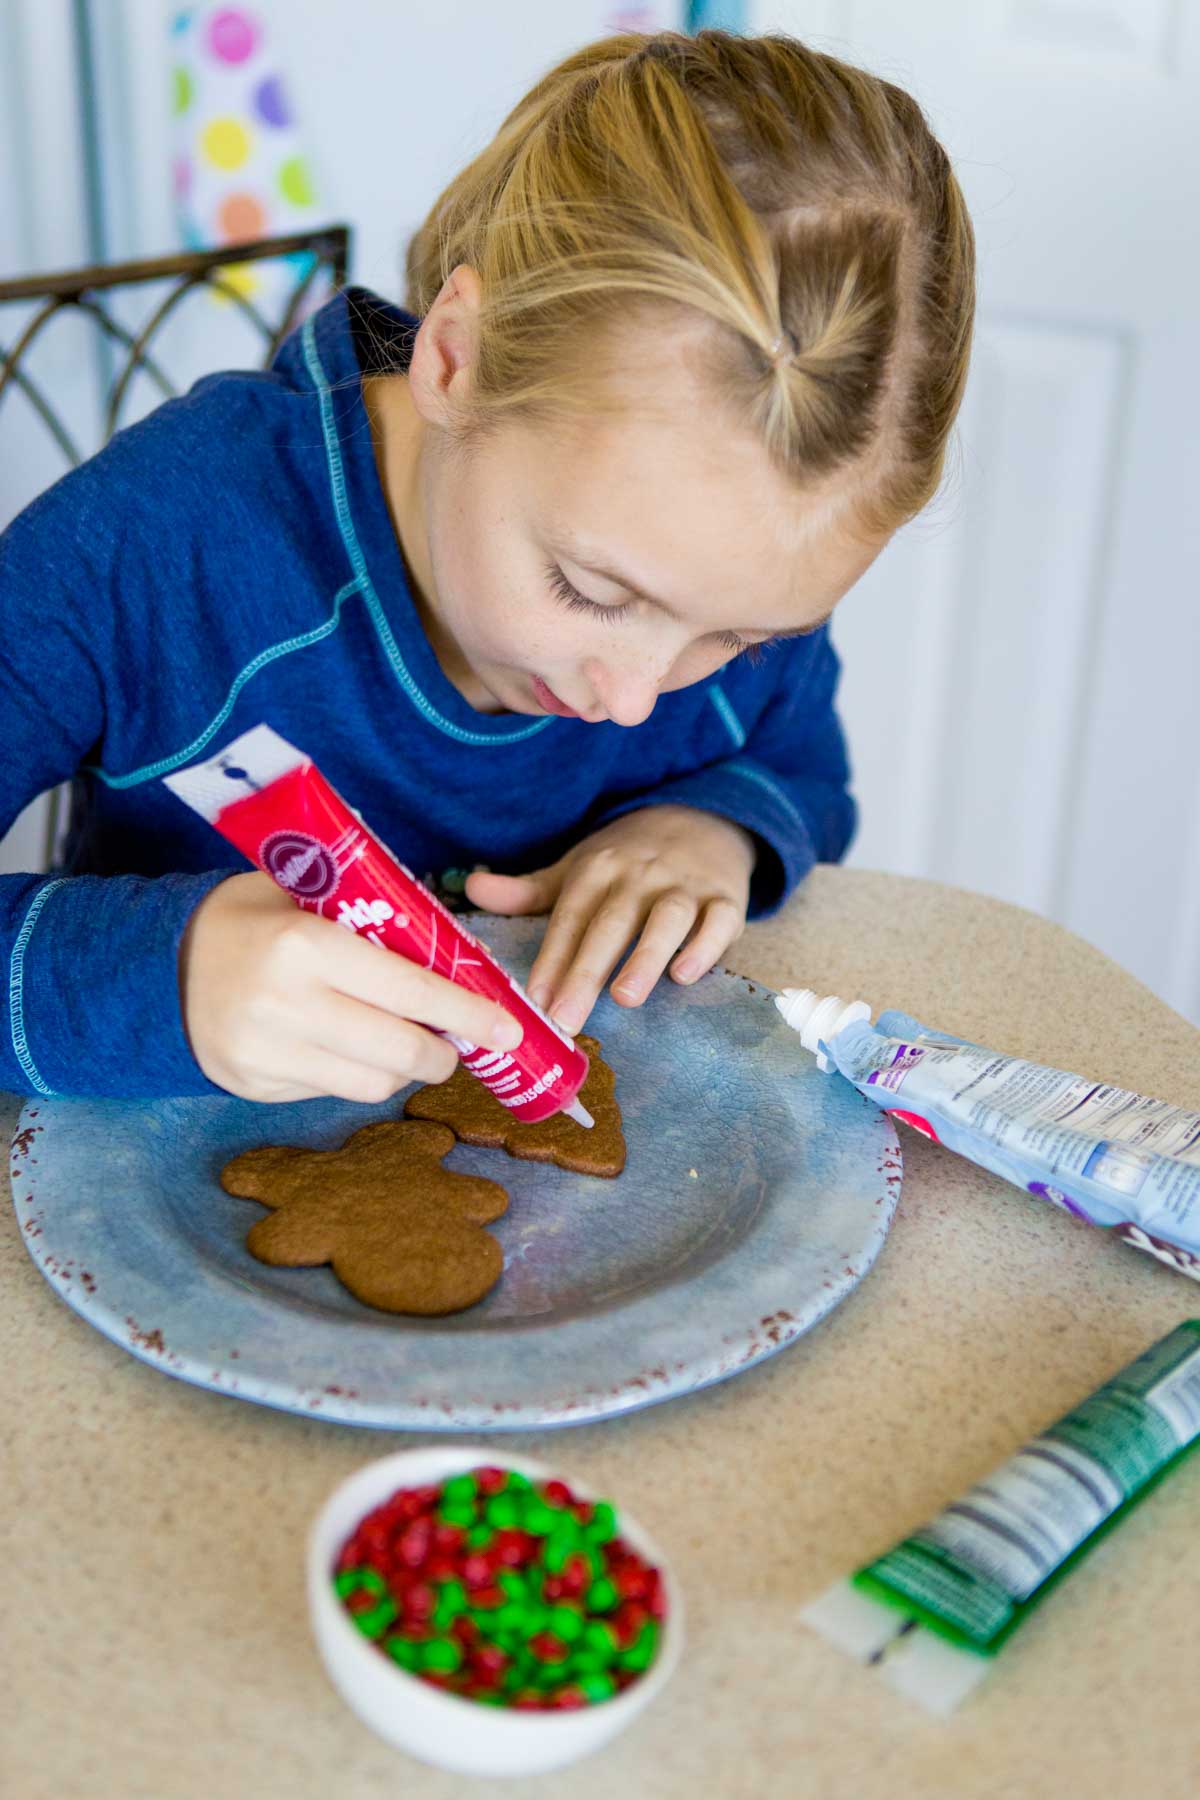 A young girl decorates a gingerbread cookie with icing.